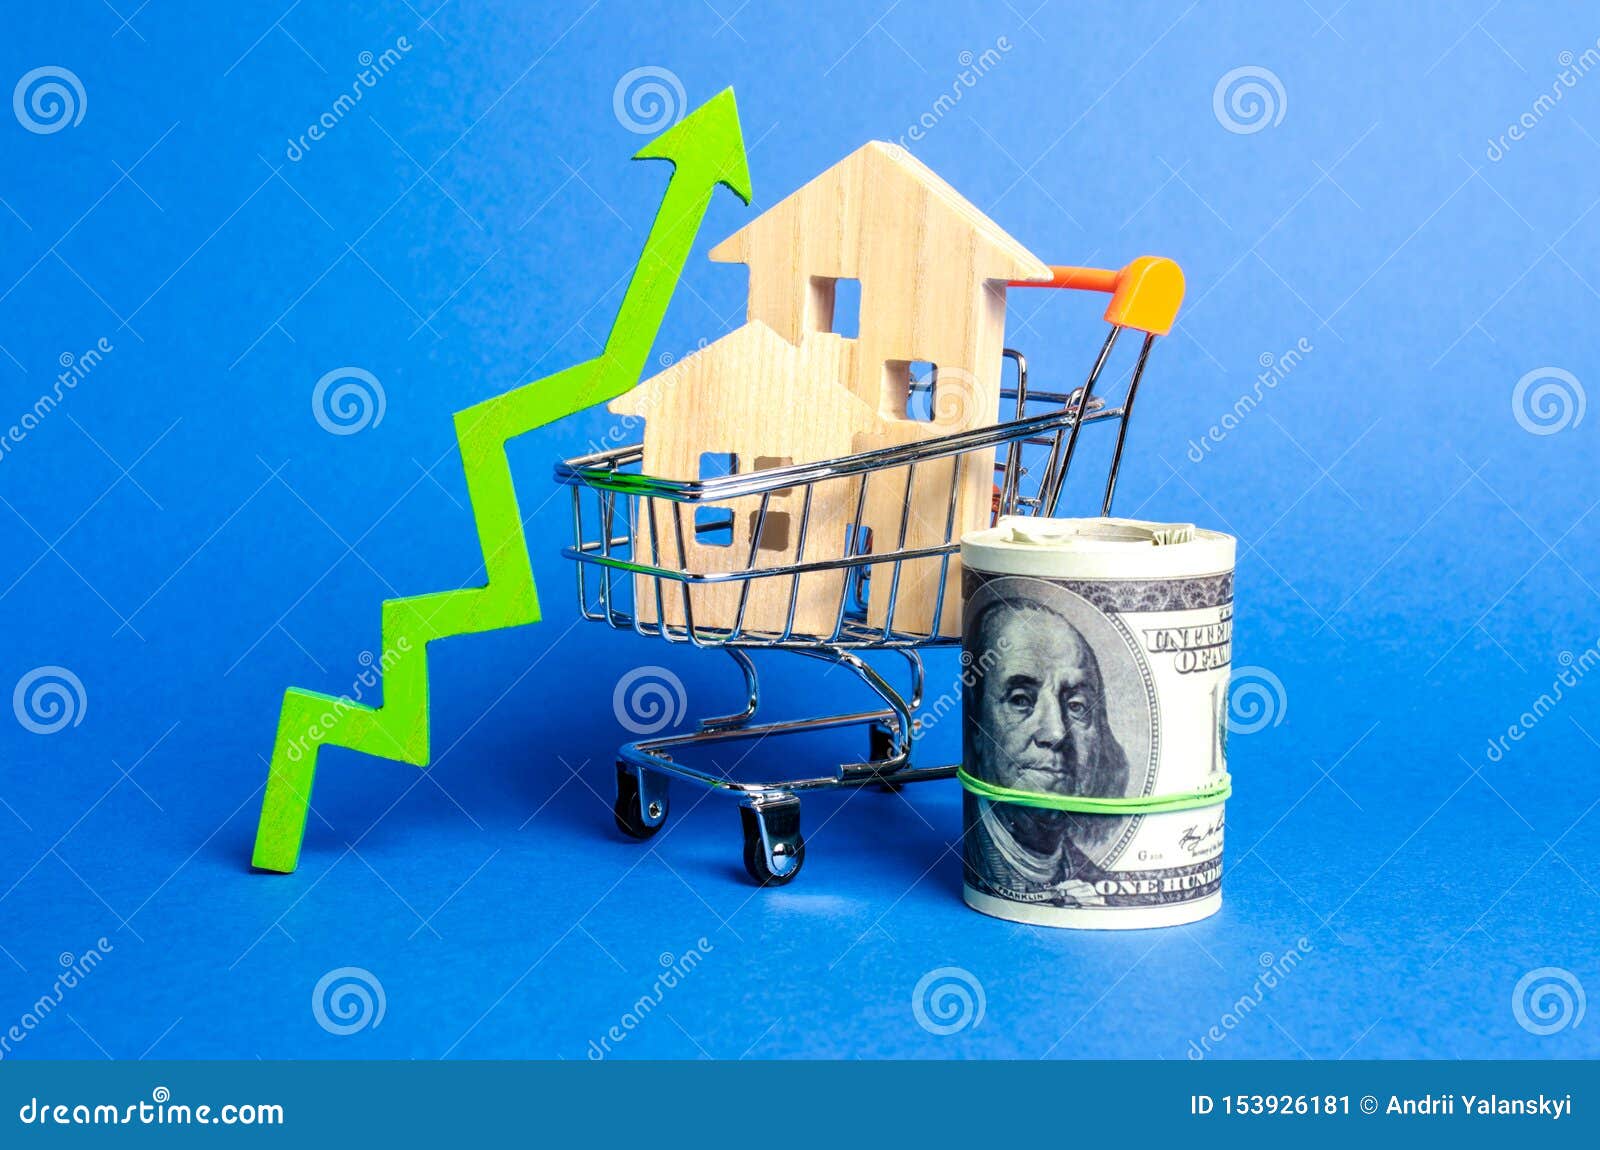 two wooden houses in a trading cart and green arrow up and money bundle. increasing cost and liquidity of real estate. attractive